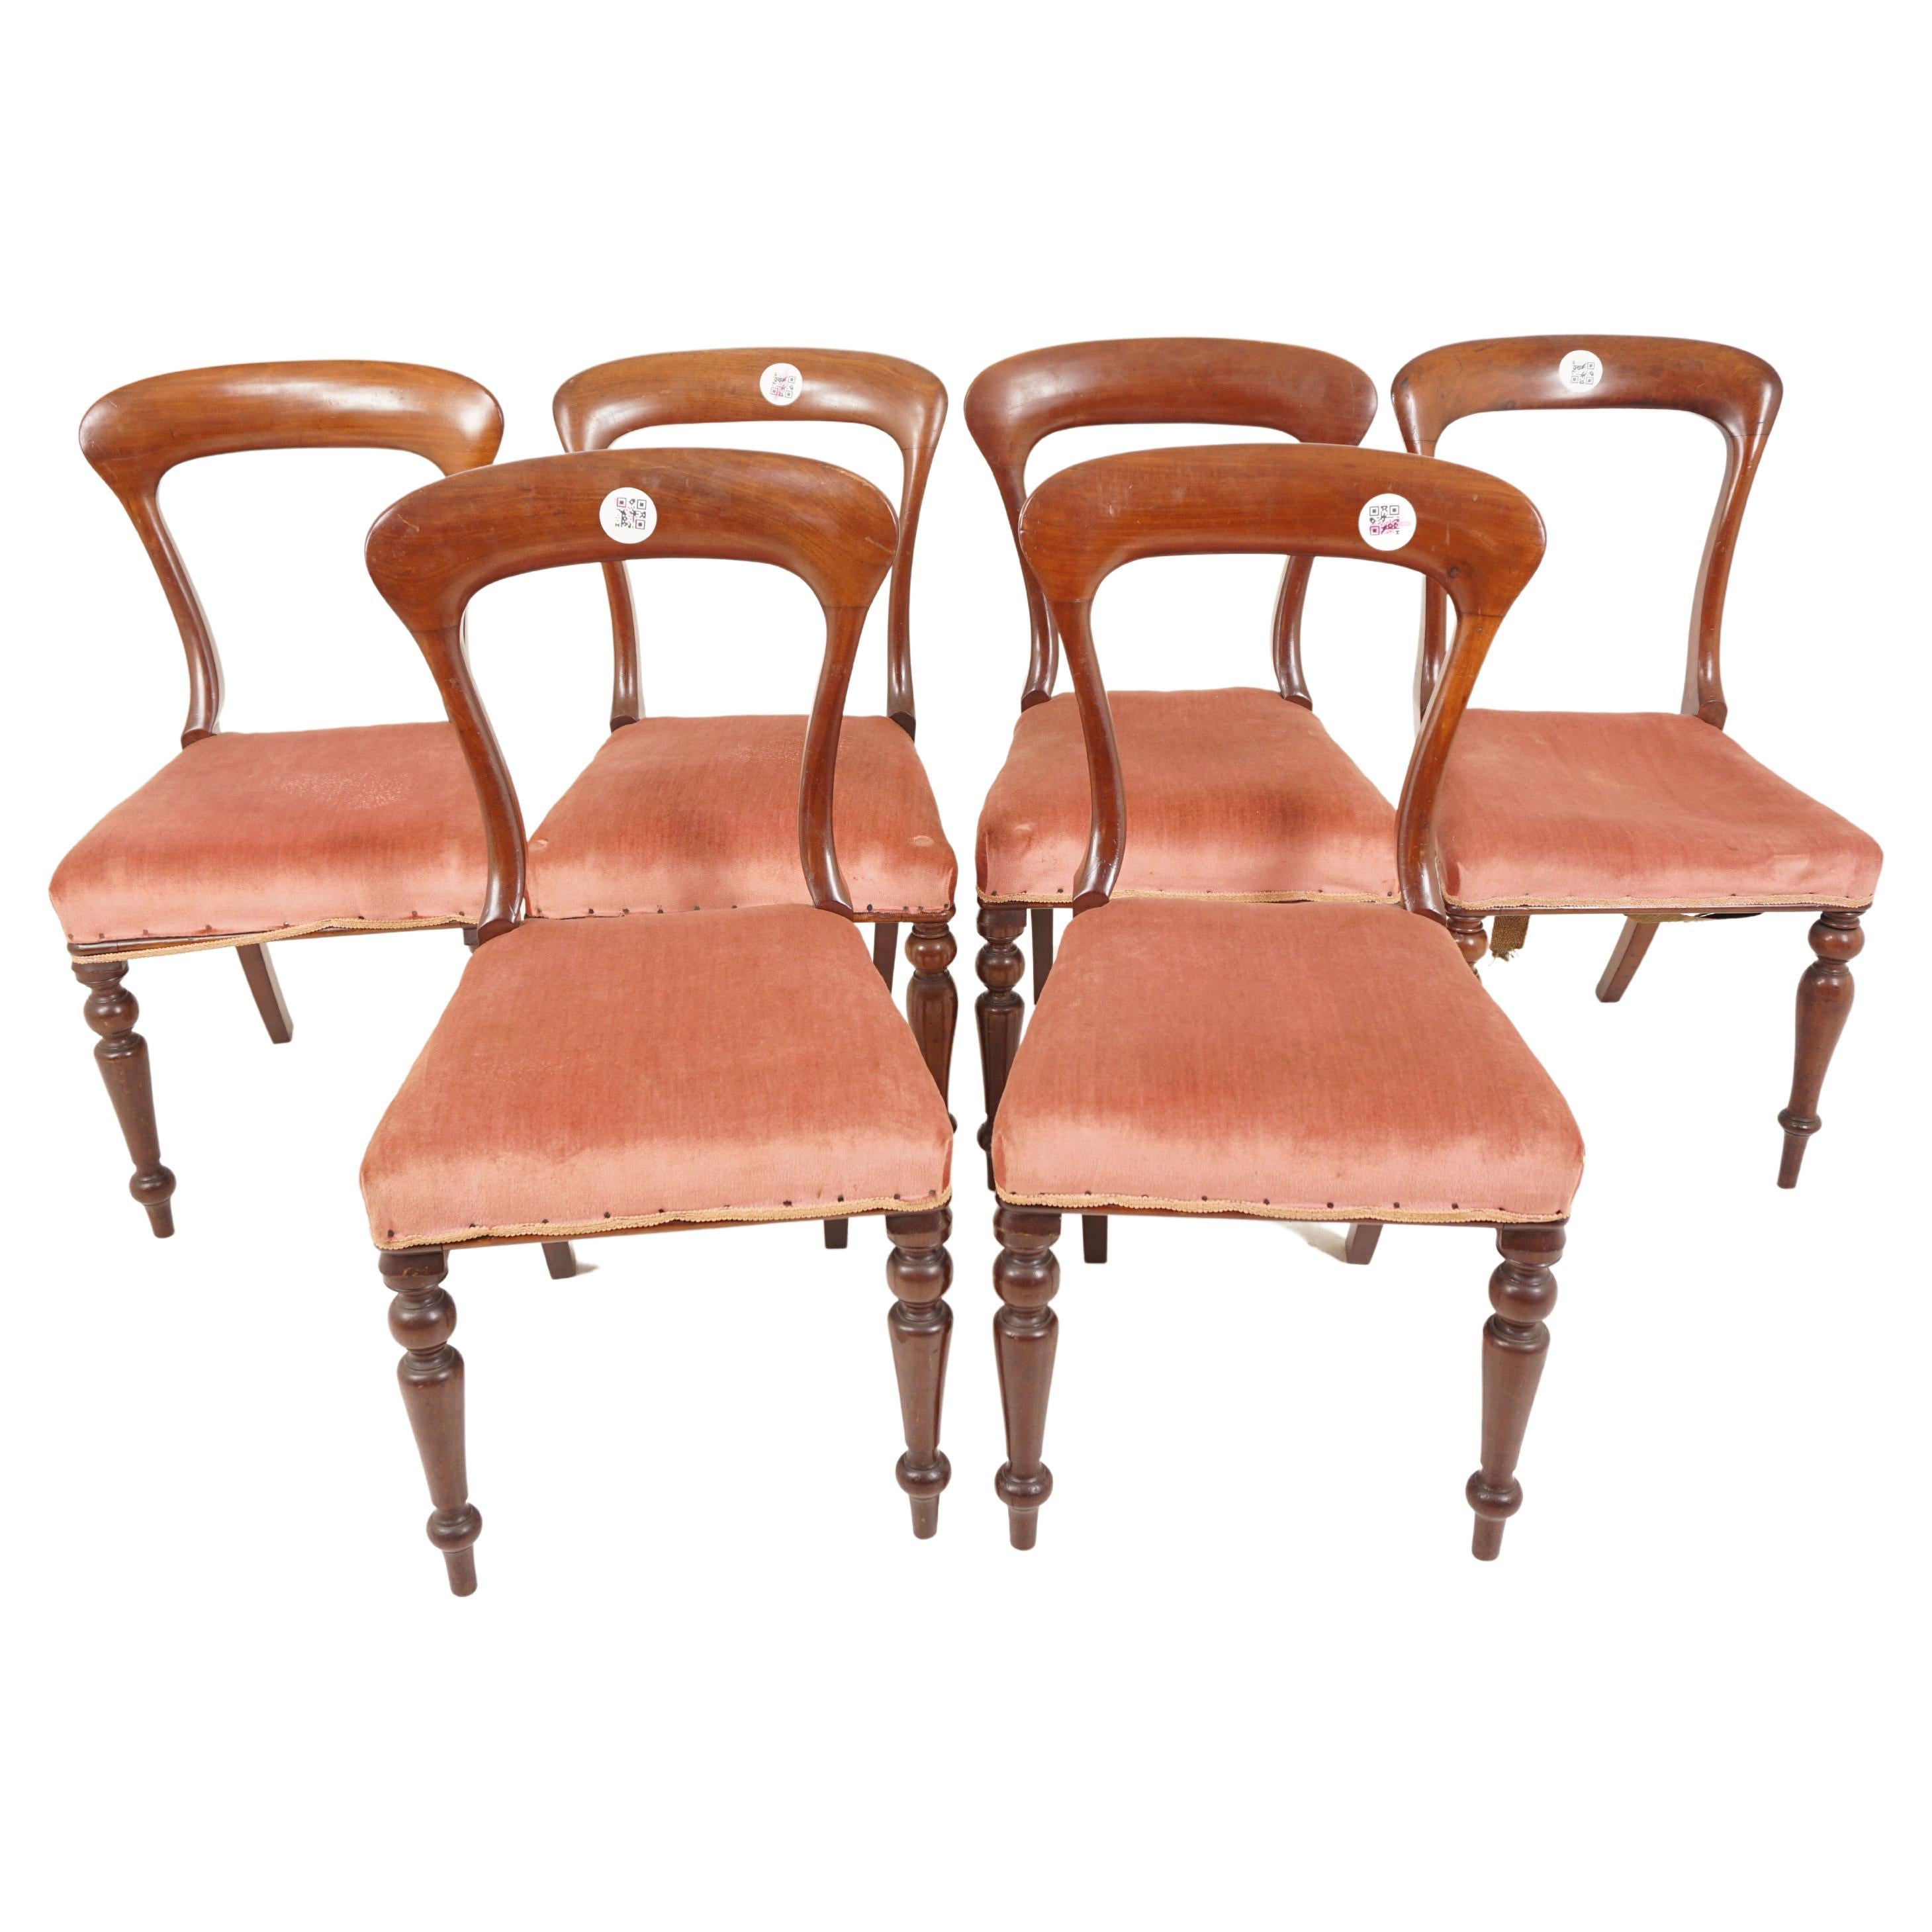 6 Antique Victorian Dining Chairs, John Taylor + Sons, Scotland 1870, H62  For Sale at 1stDibs